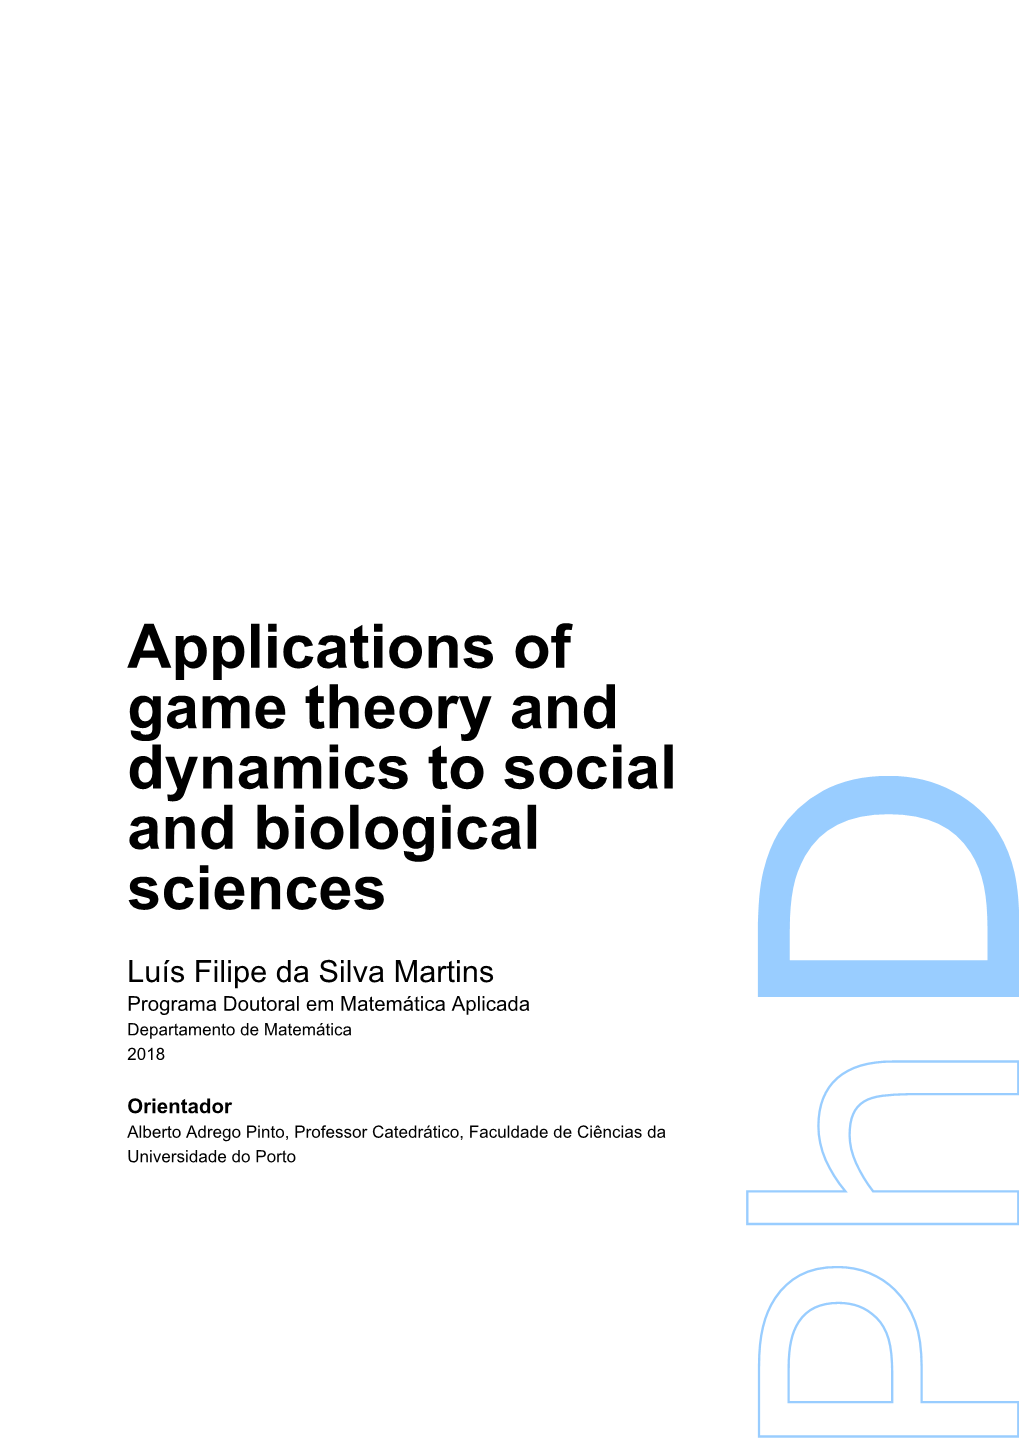 Applications of Game Theory and Dynamics to Social and Biological Sciences